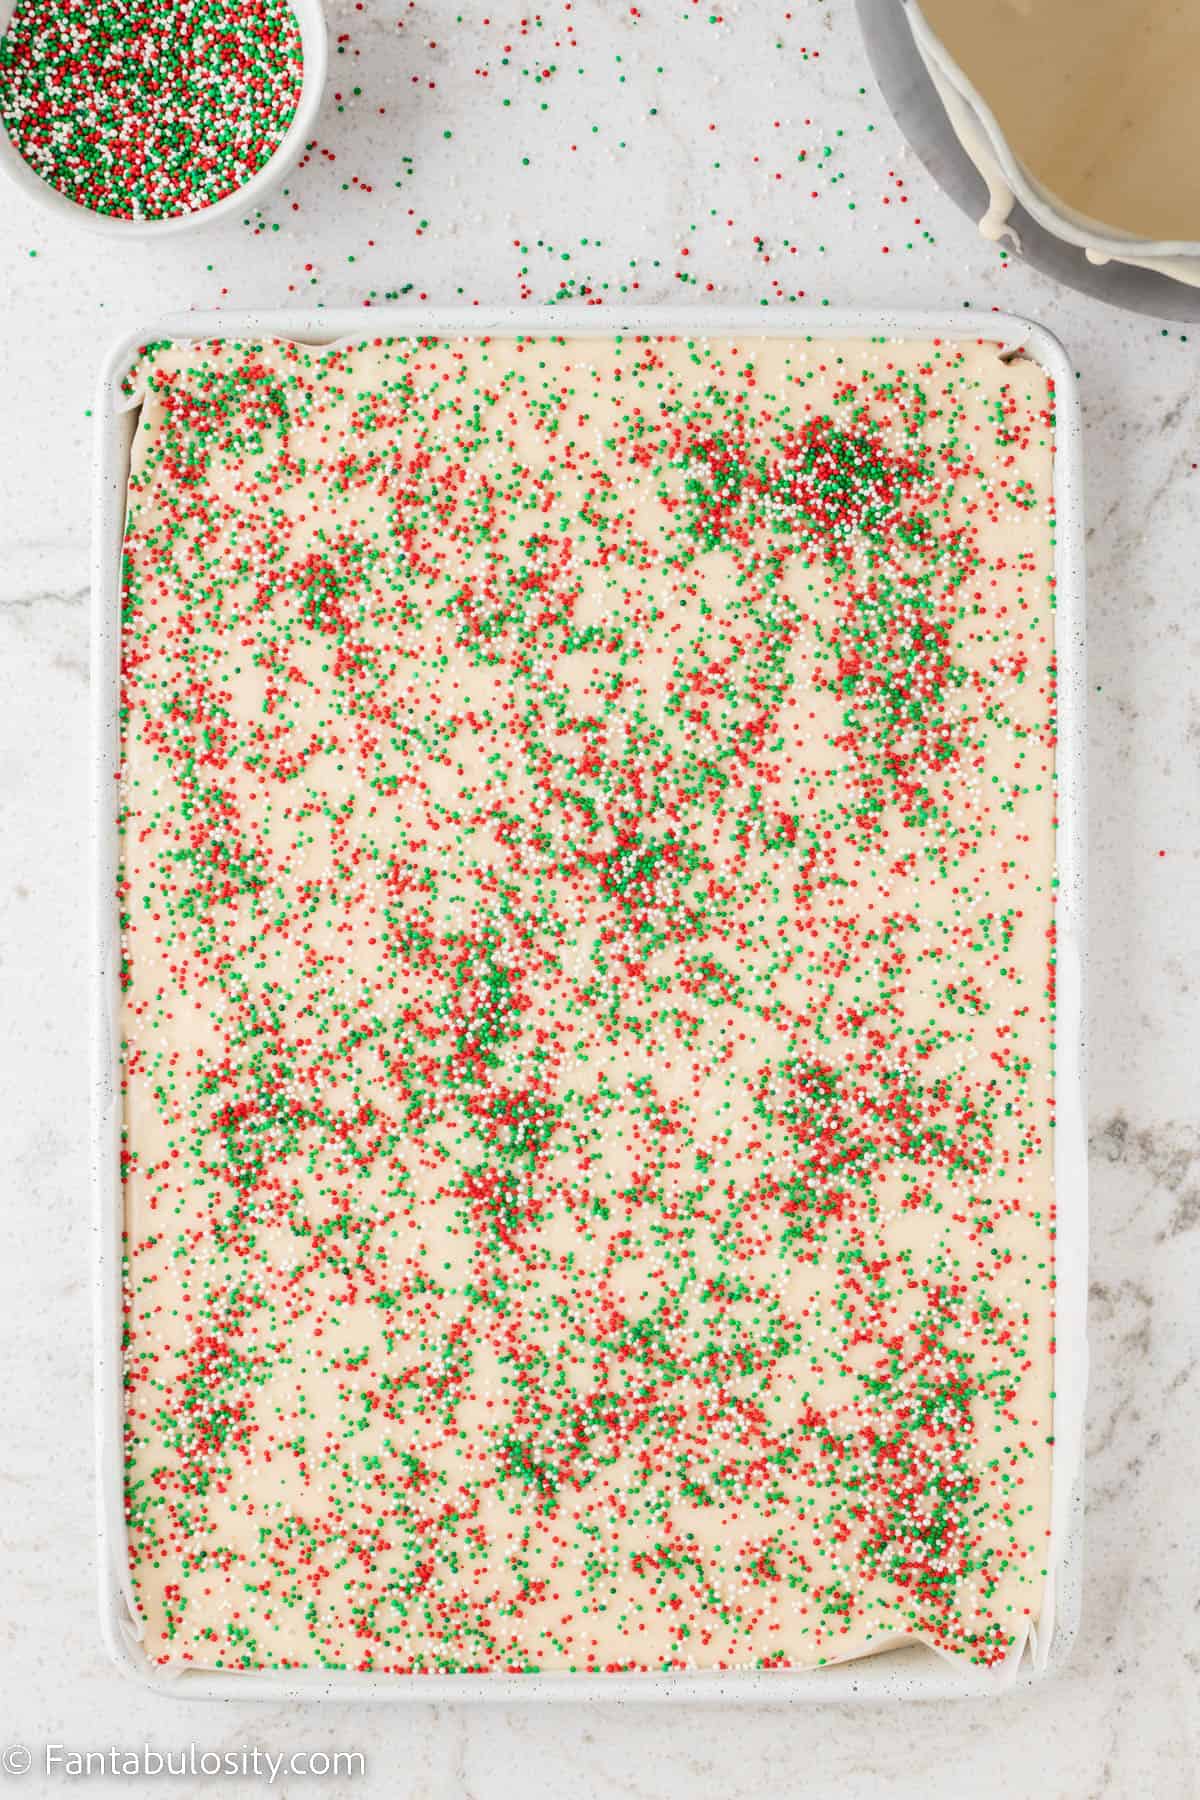 A 9x13 pan is filled with white chocolate fudge topped with red, white and green sprinkles